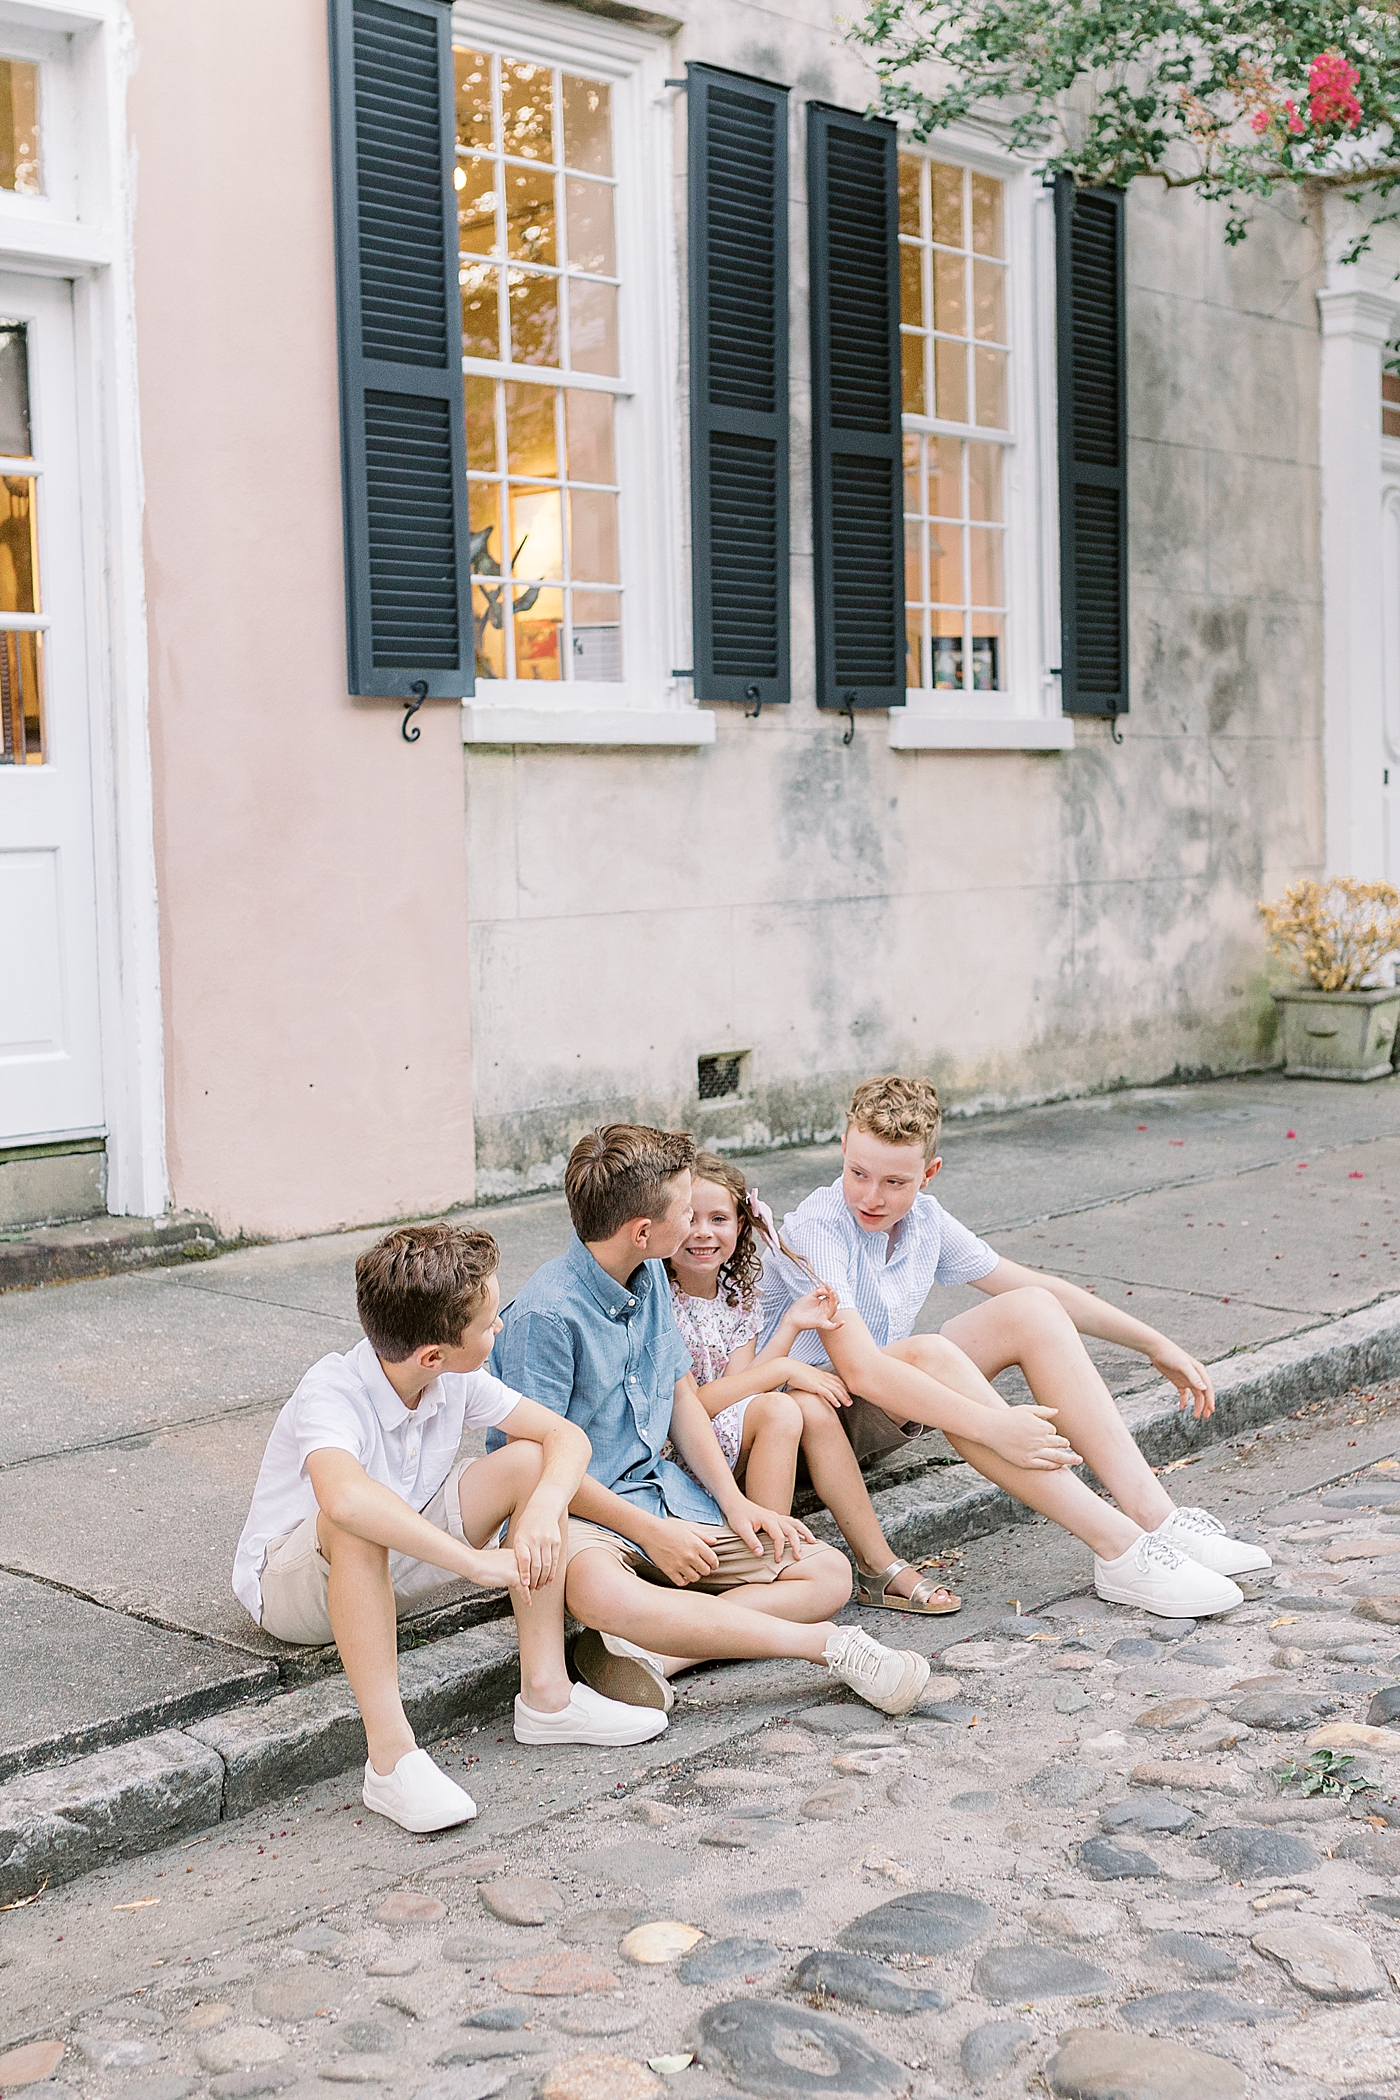 Siblings laughing together sitting near the sidewalk | Photo by Caitlyn Motycka Photography